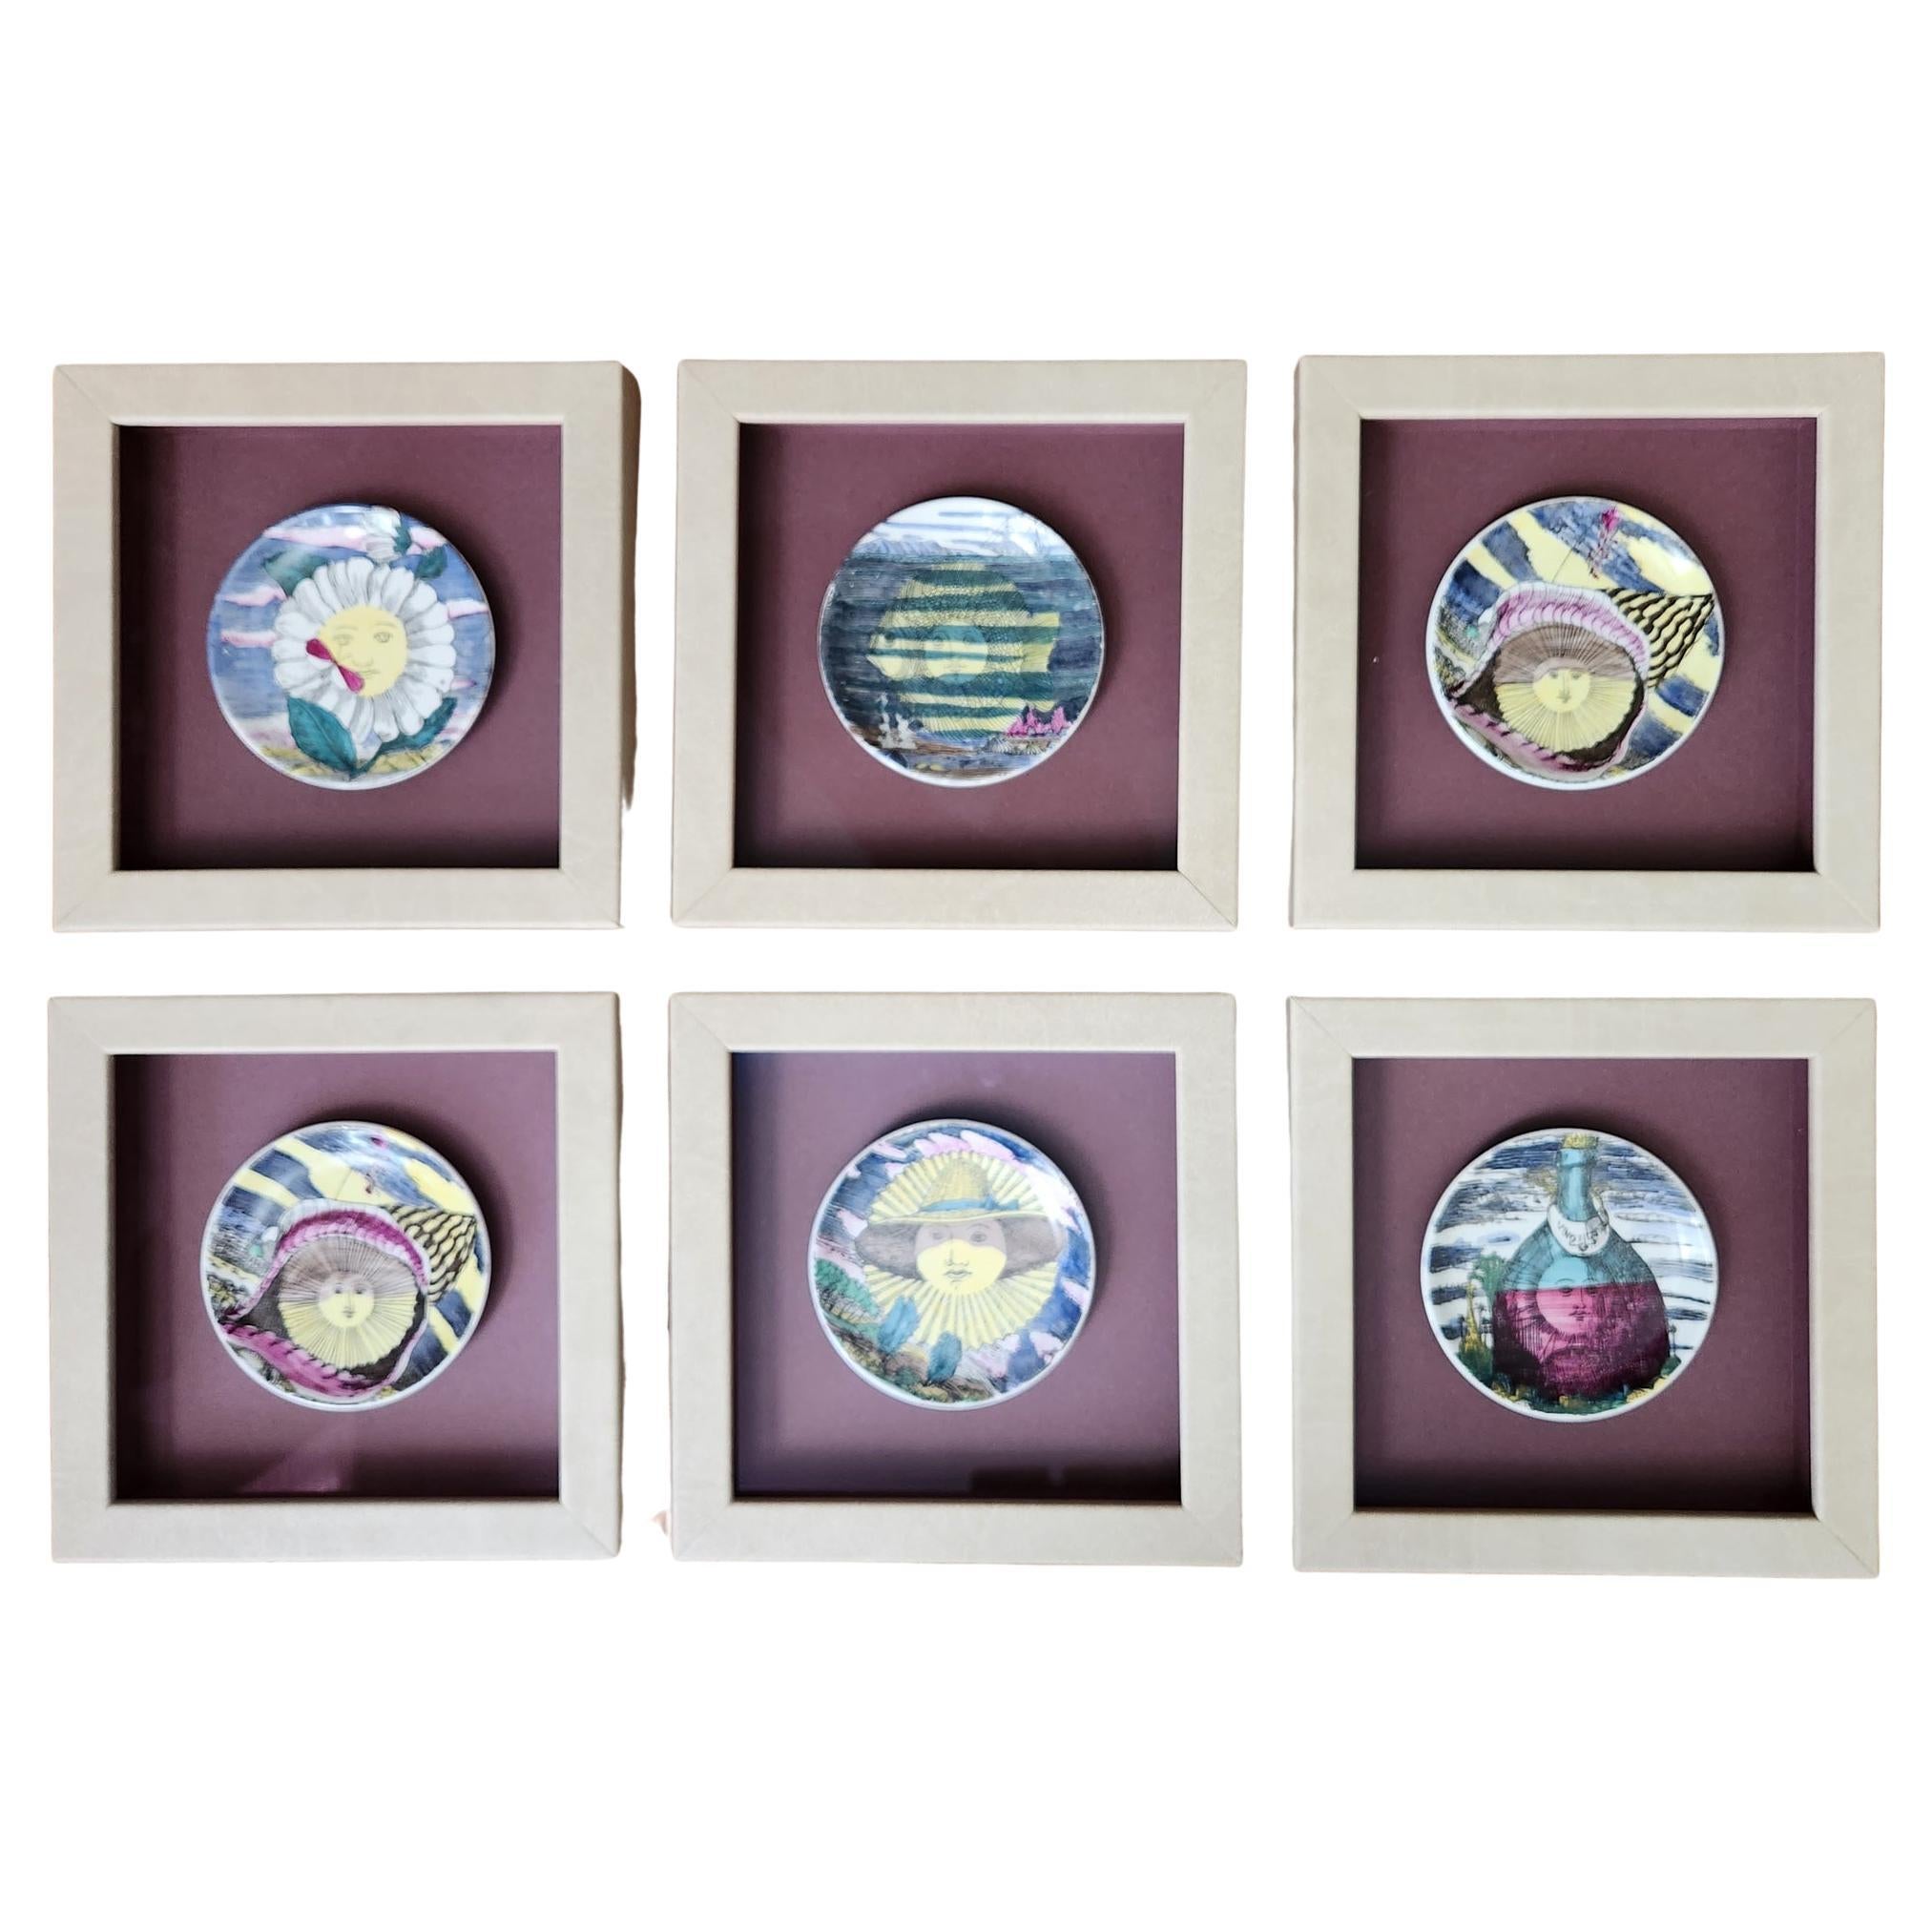 Piero Fornasetti Framed Set of Coasters of the Months, "12 Mesi, 12 Soli" design